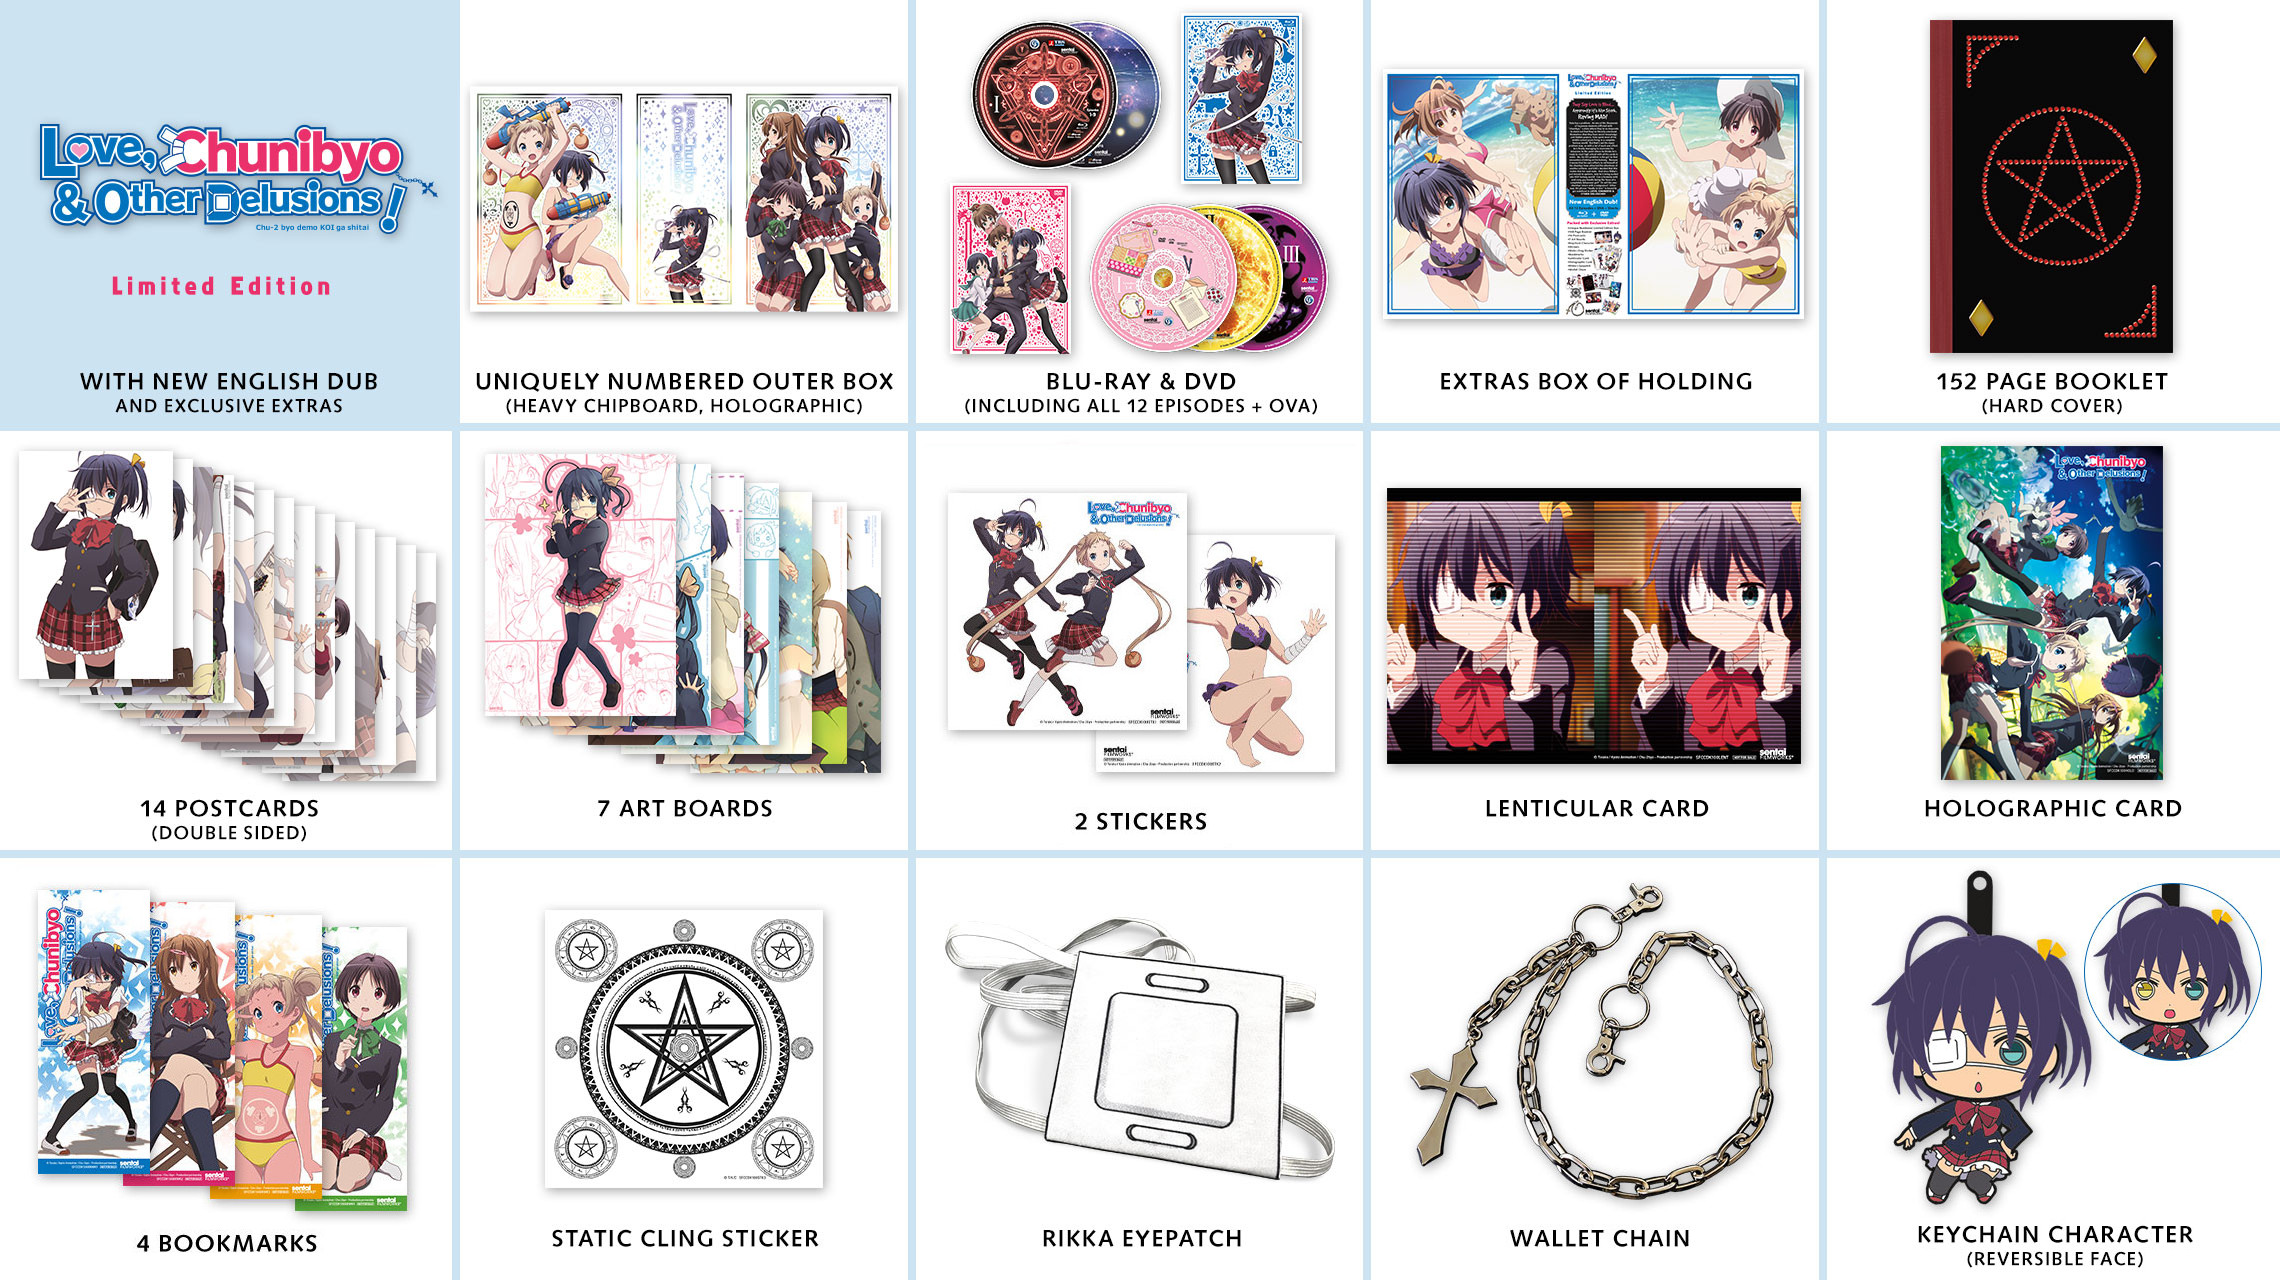 Love, Chunibyo & Other Delusions Box Set Contents Revealed